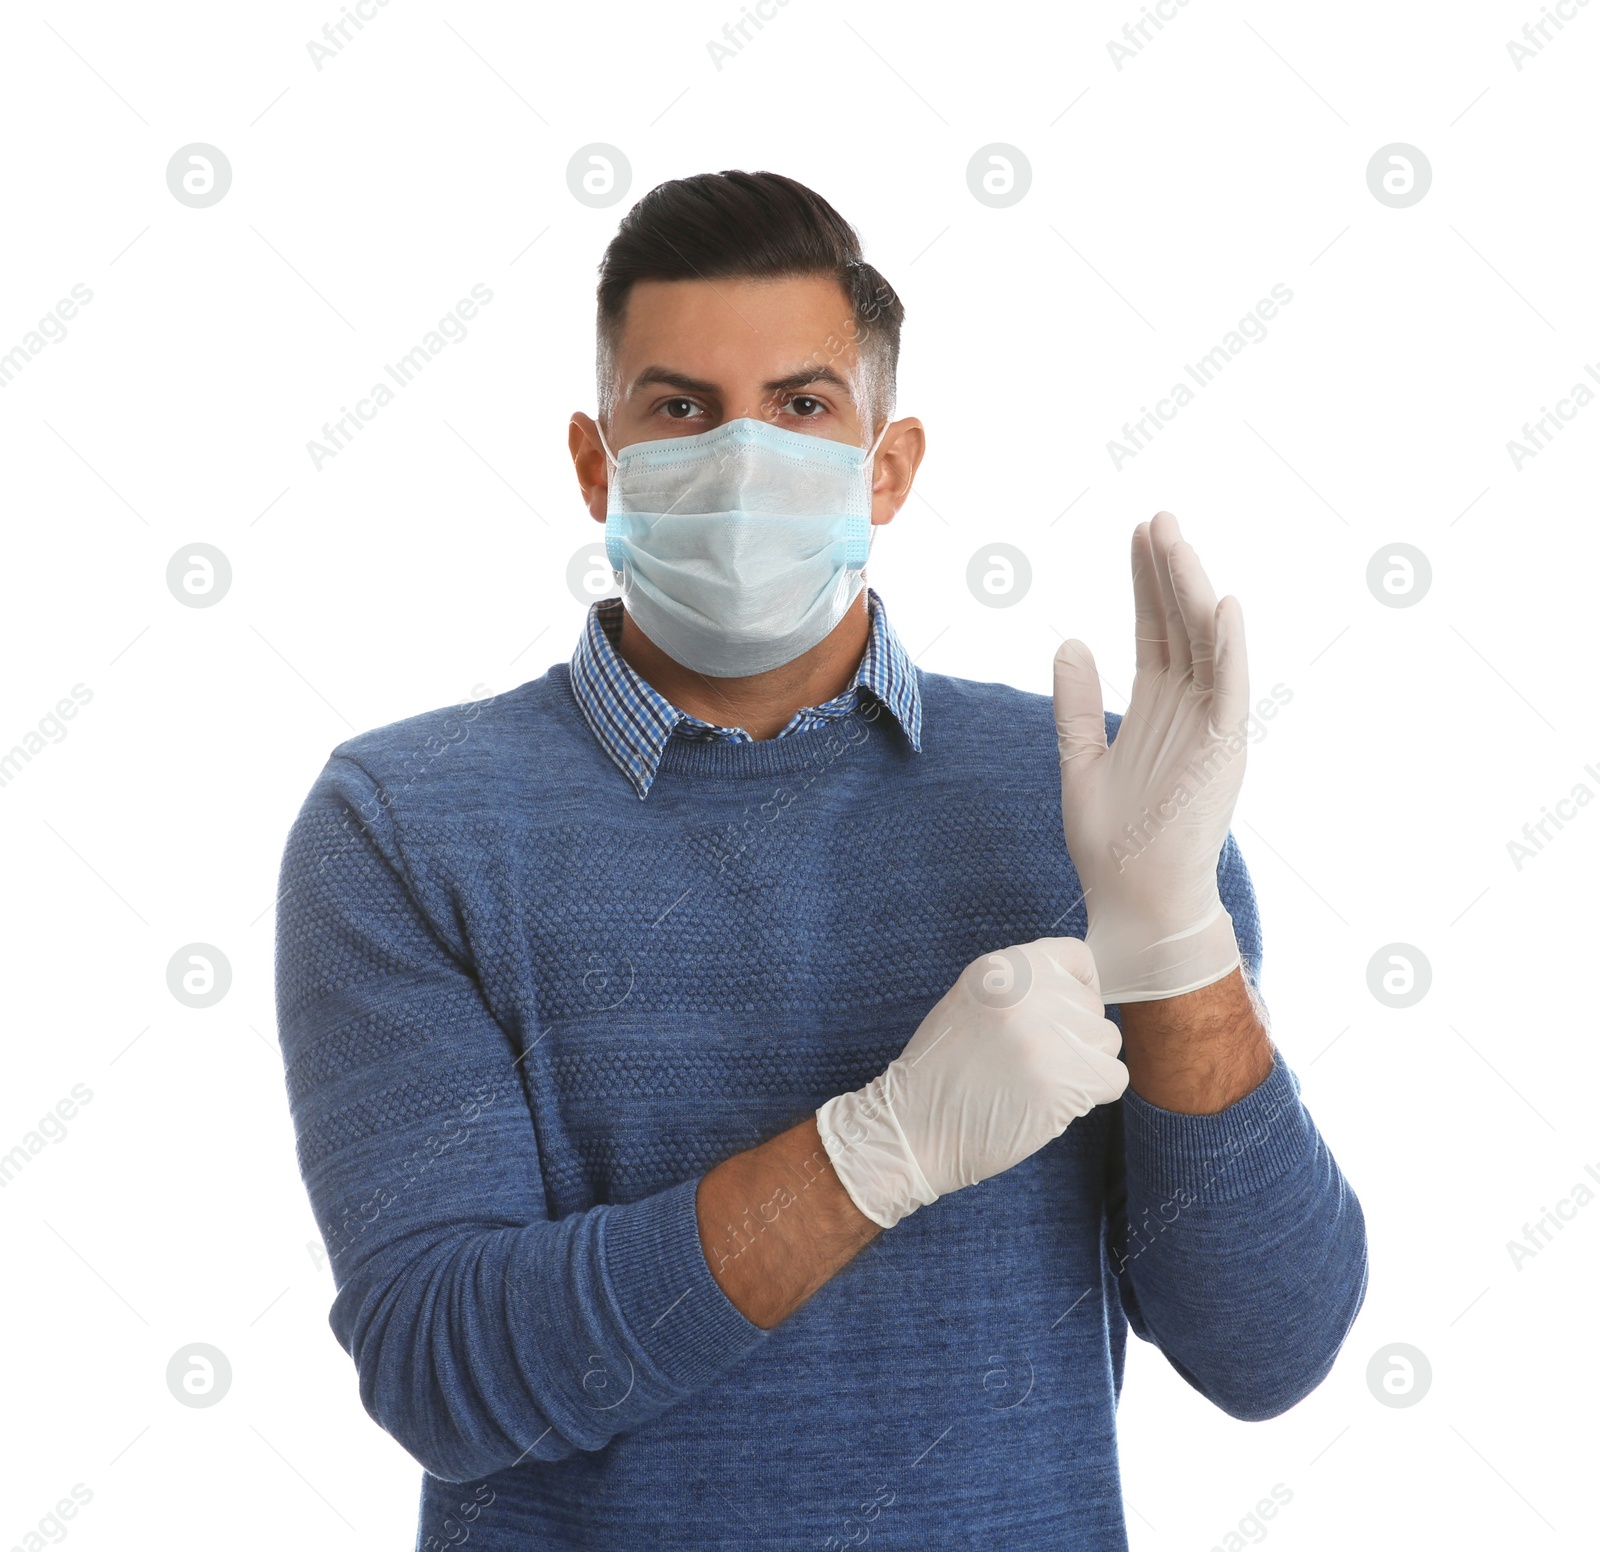 Photo of Man in protective face mask putting on medical gloves against white background